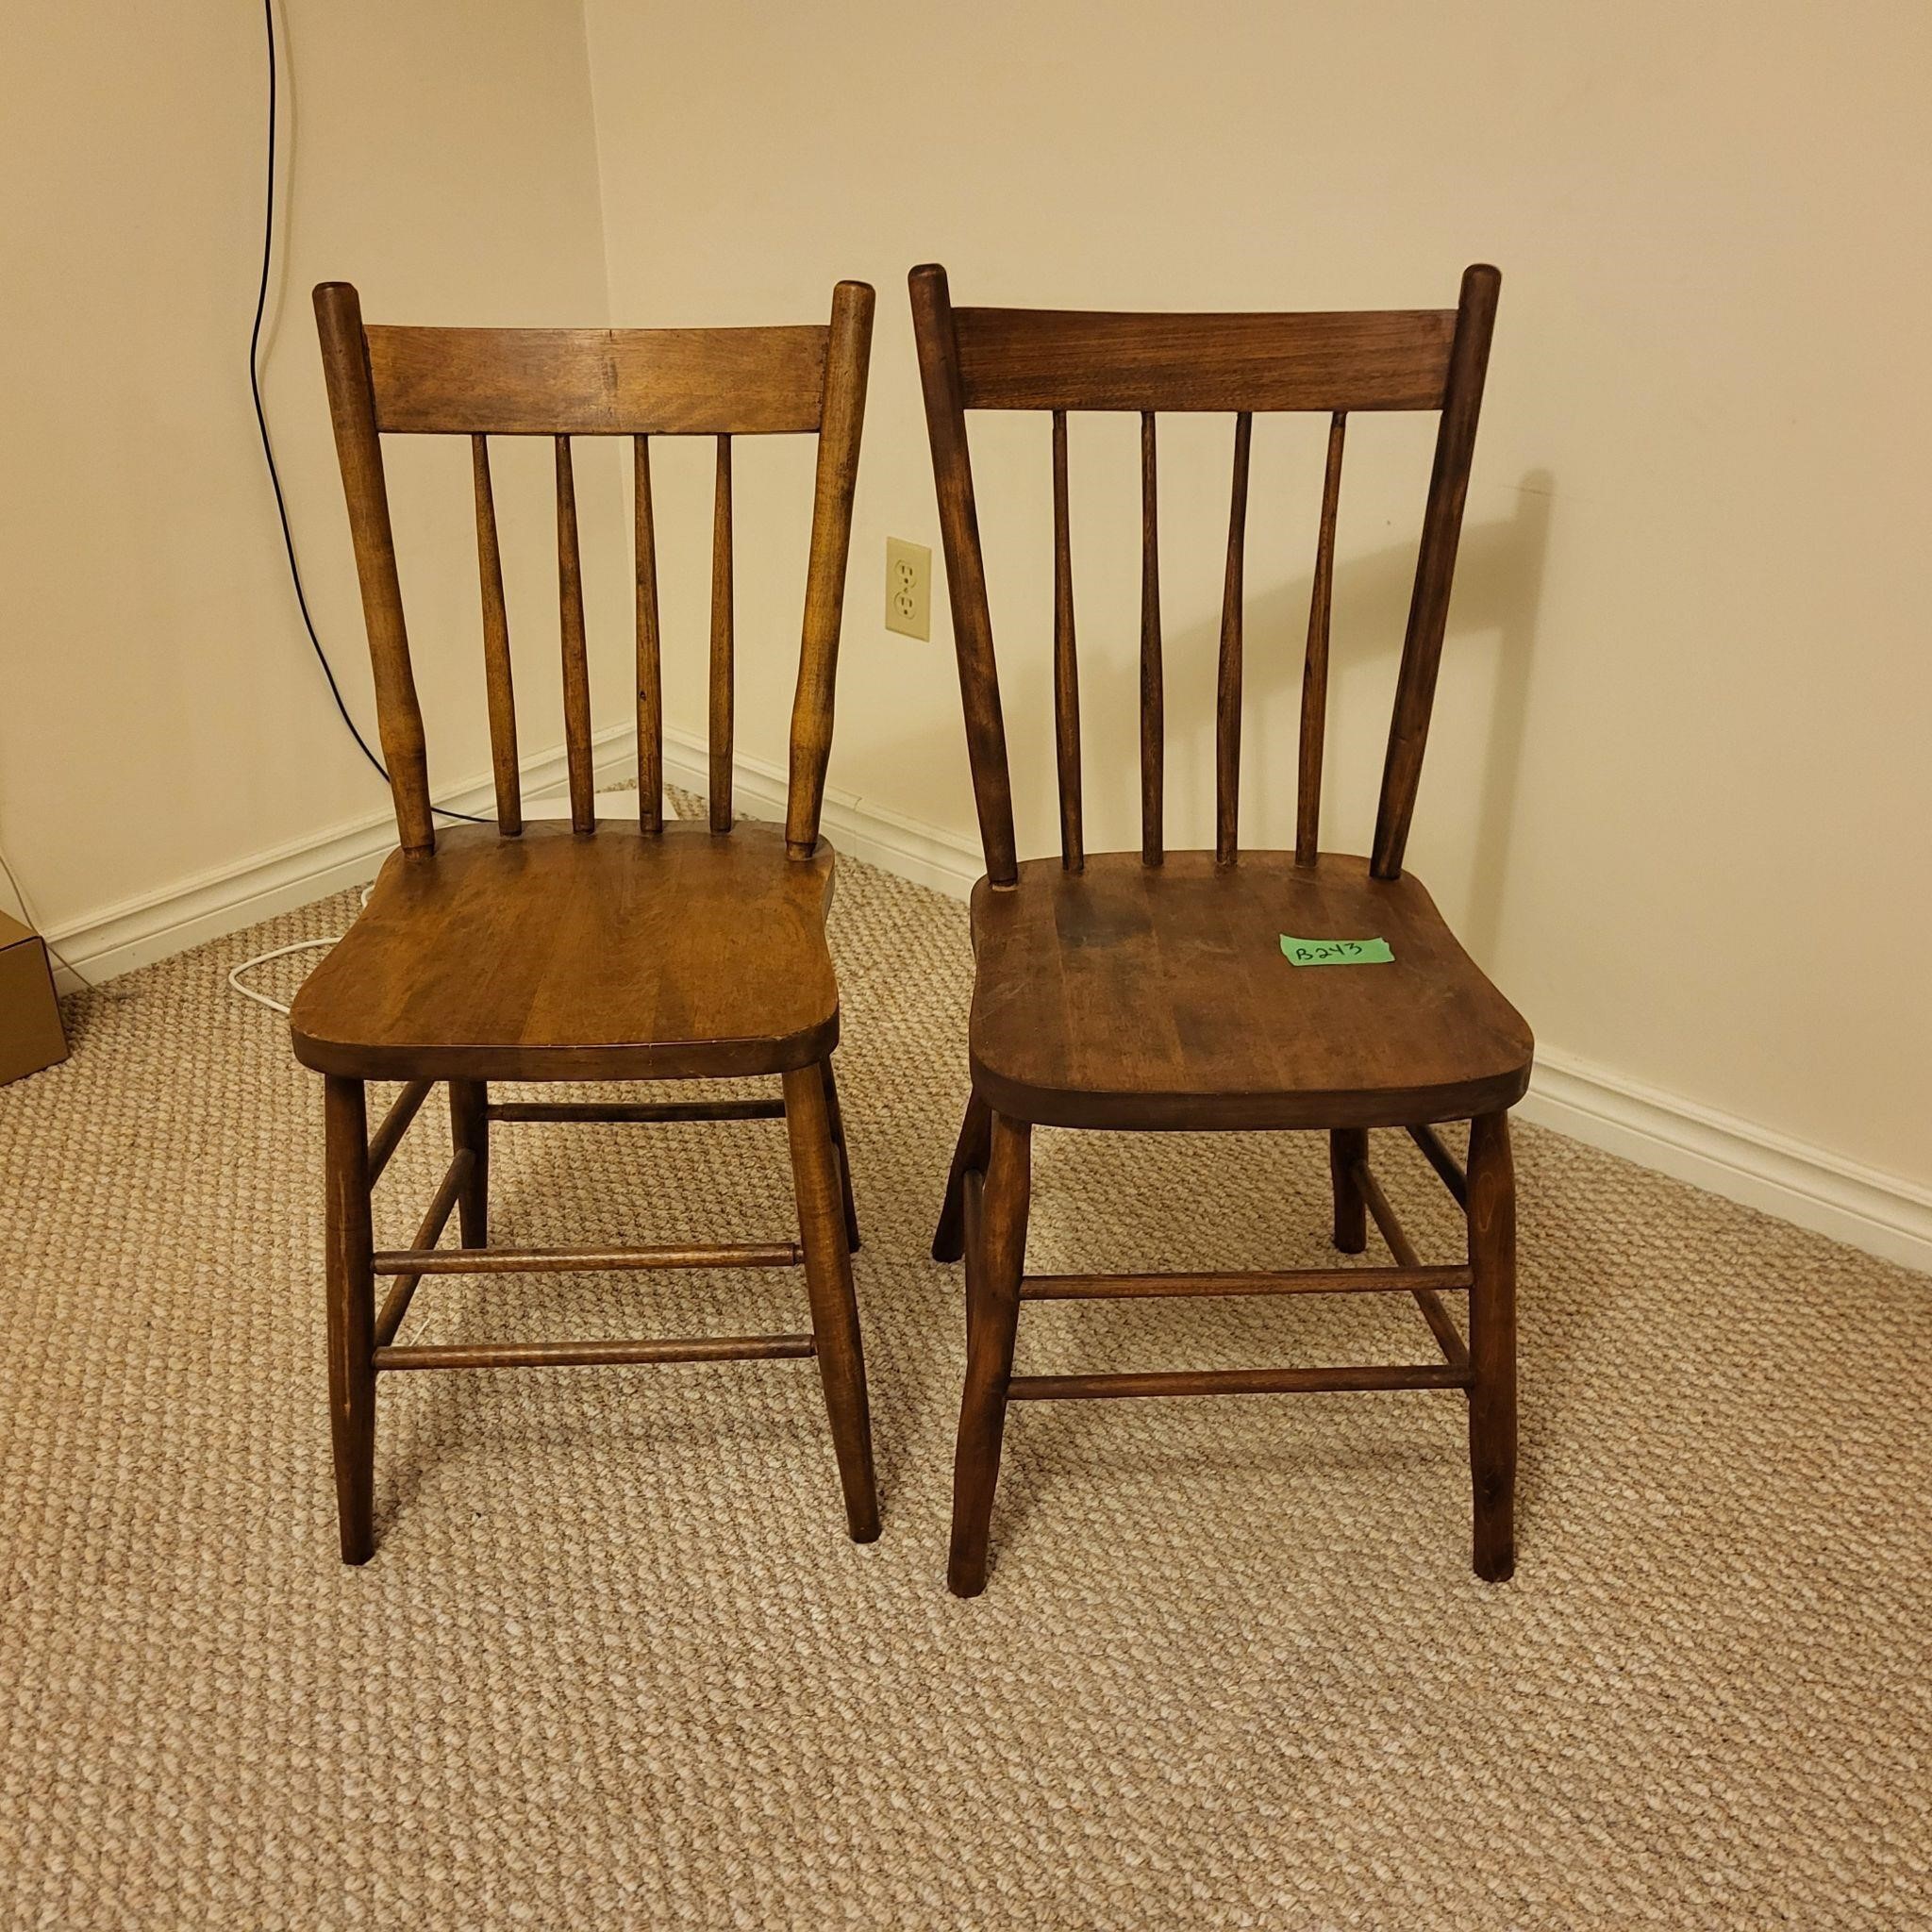 B243 Two vintage wood chairs